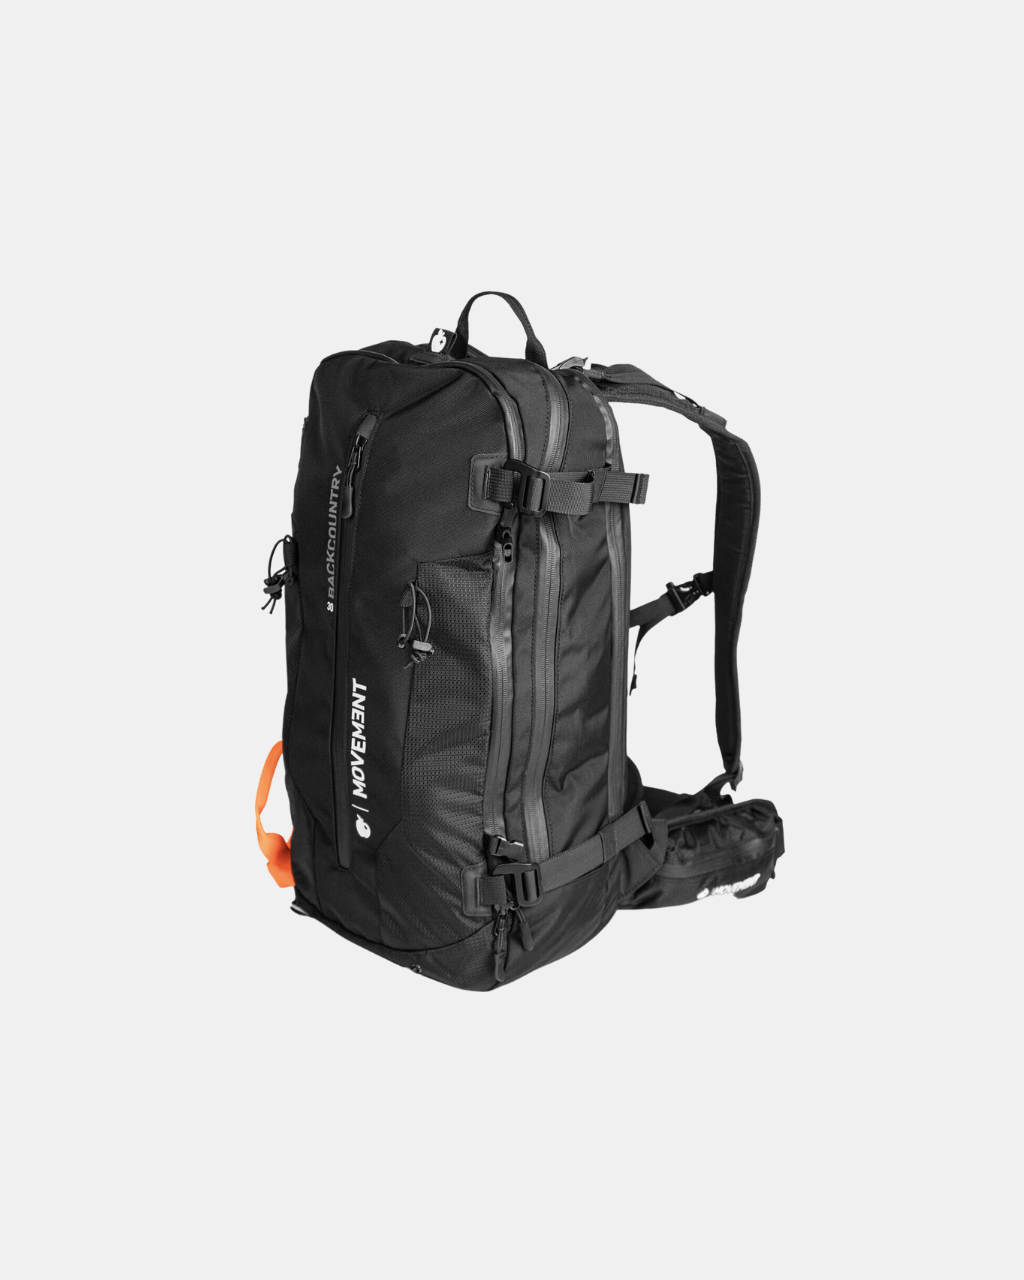 Experience Movement's design and functionality through the Backcountry backpack.